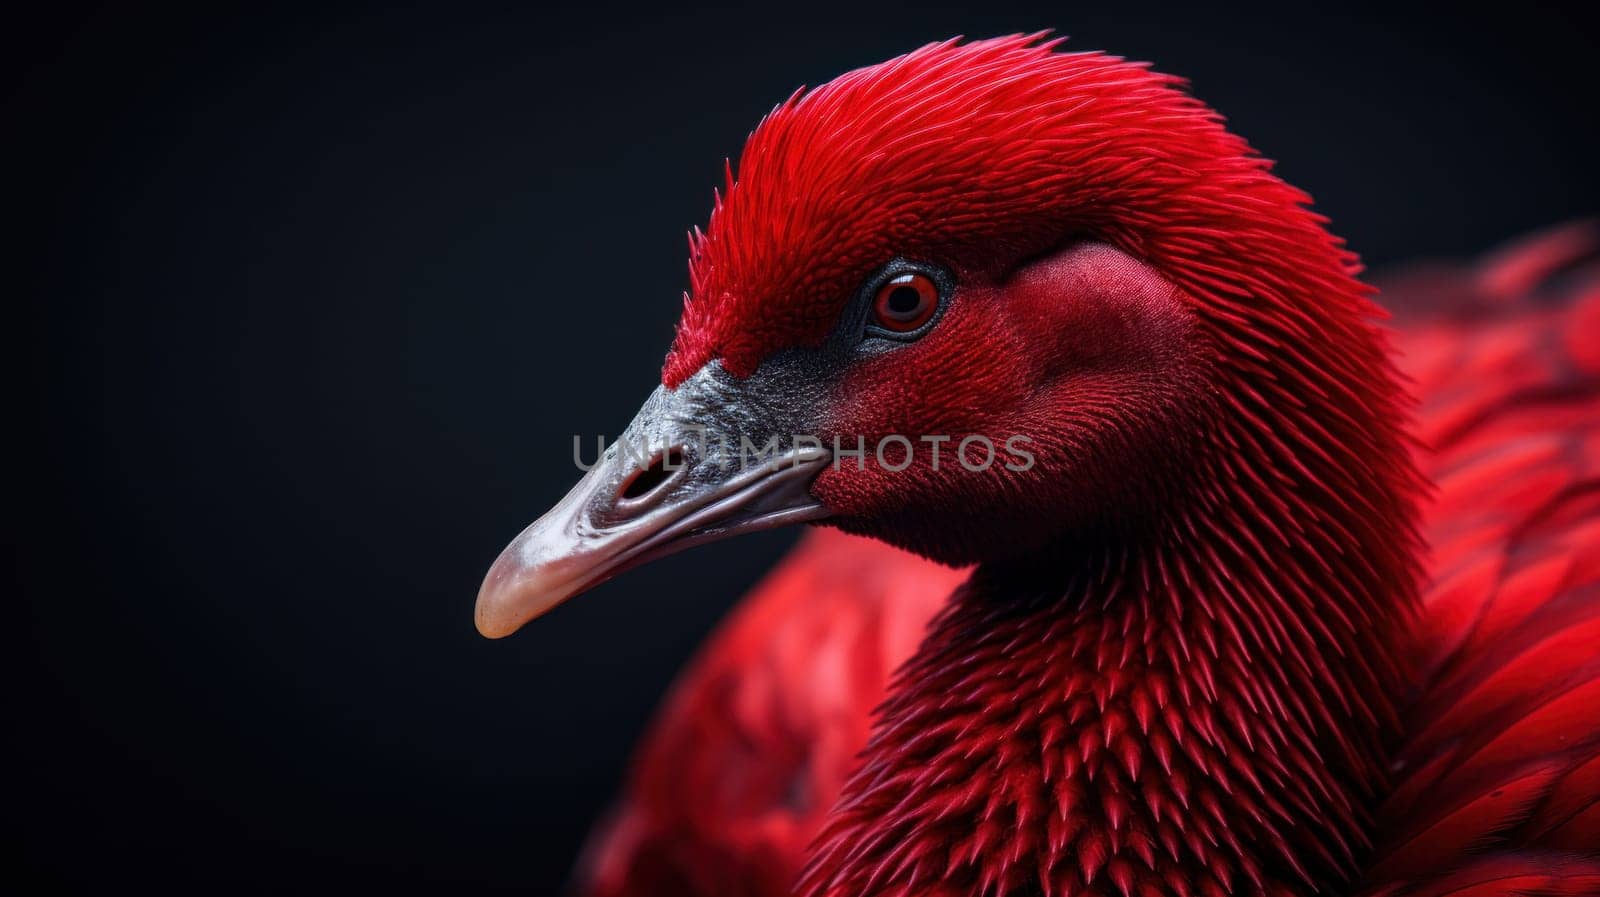 A close up of a red bird with black background